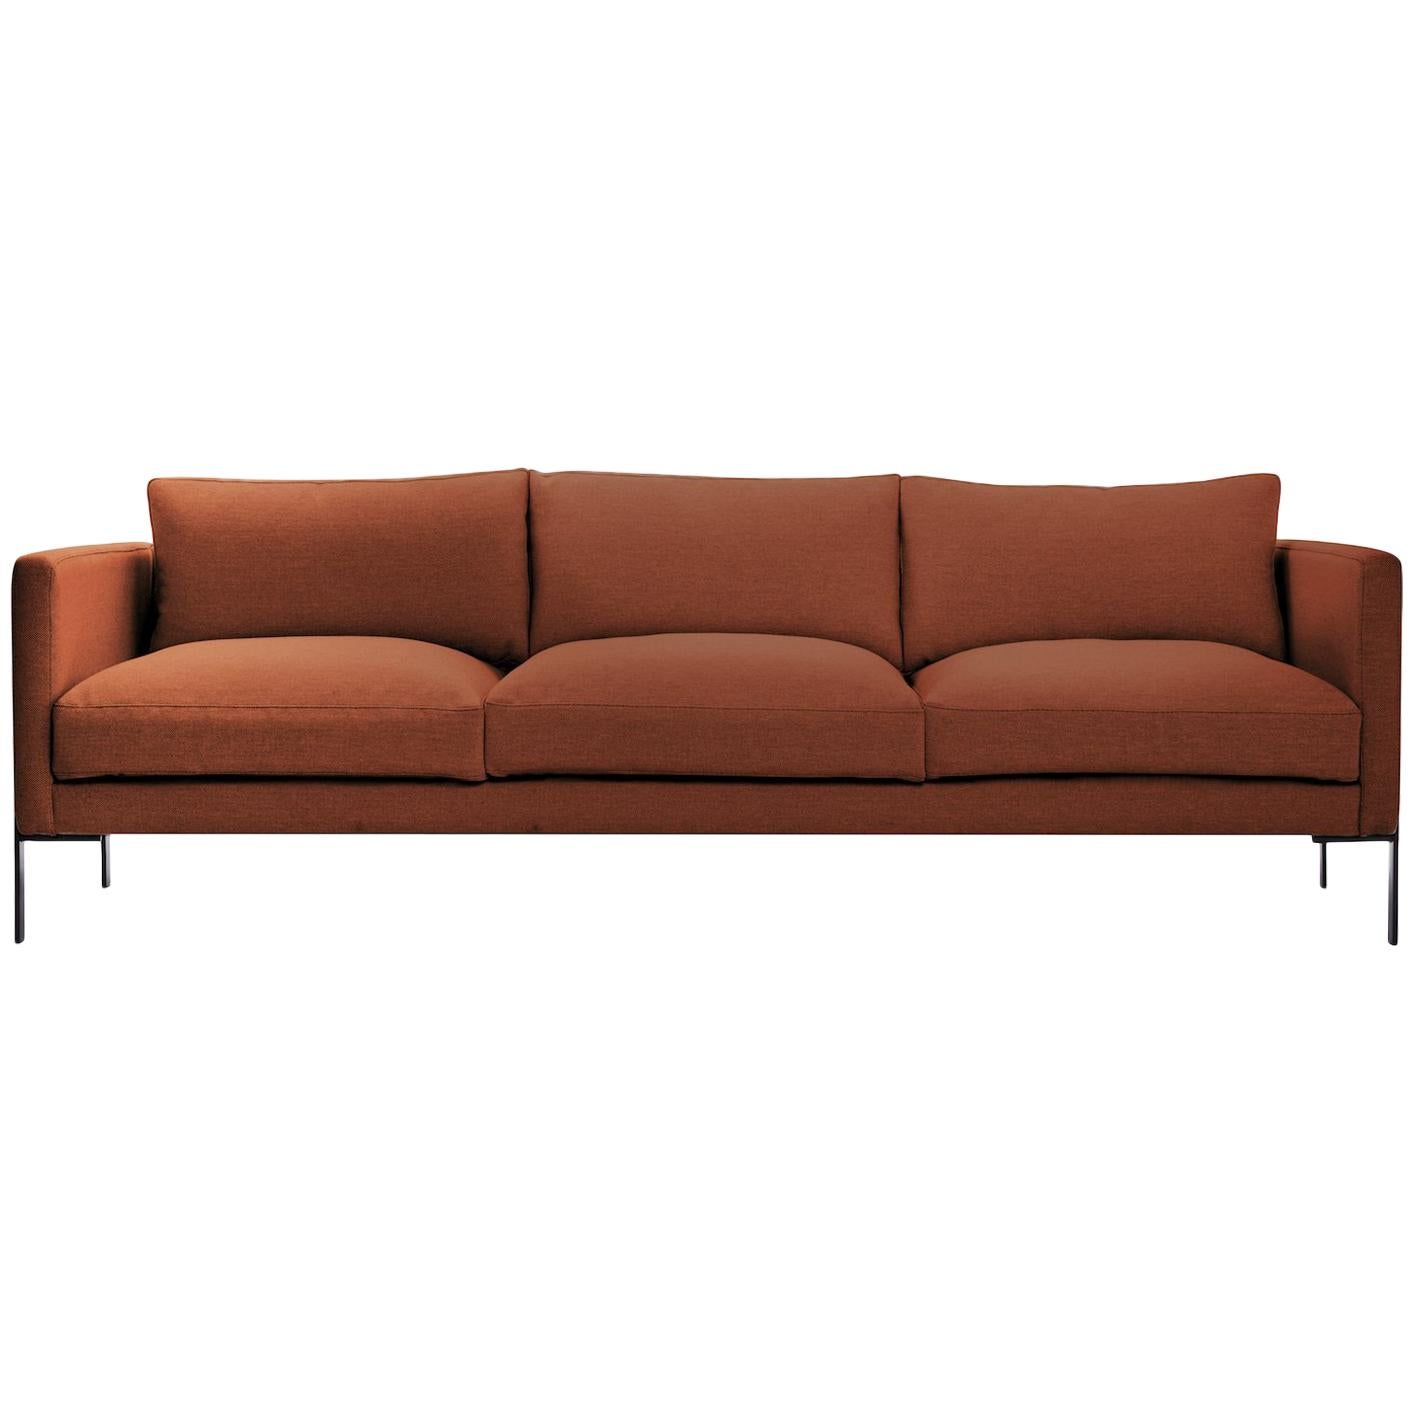 Truss Sofa in Maharam Chestnut Fabric & Powder-Coated Steel by TRNK For Sale